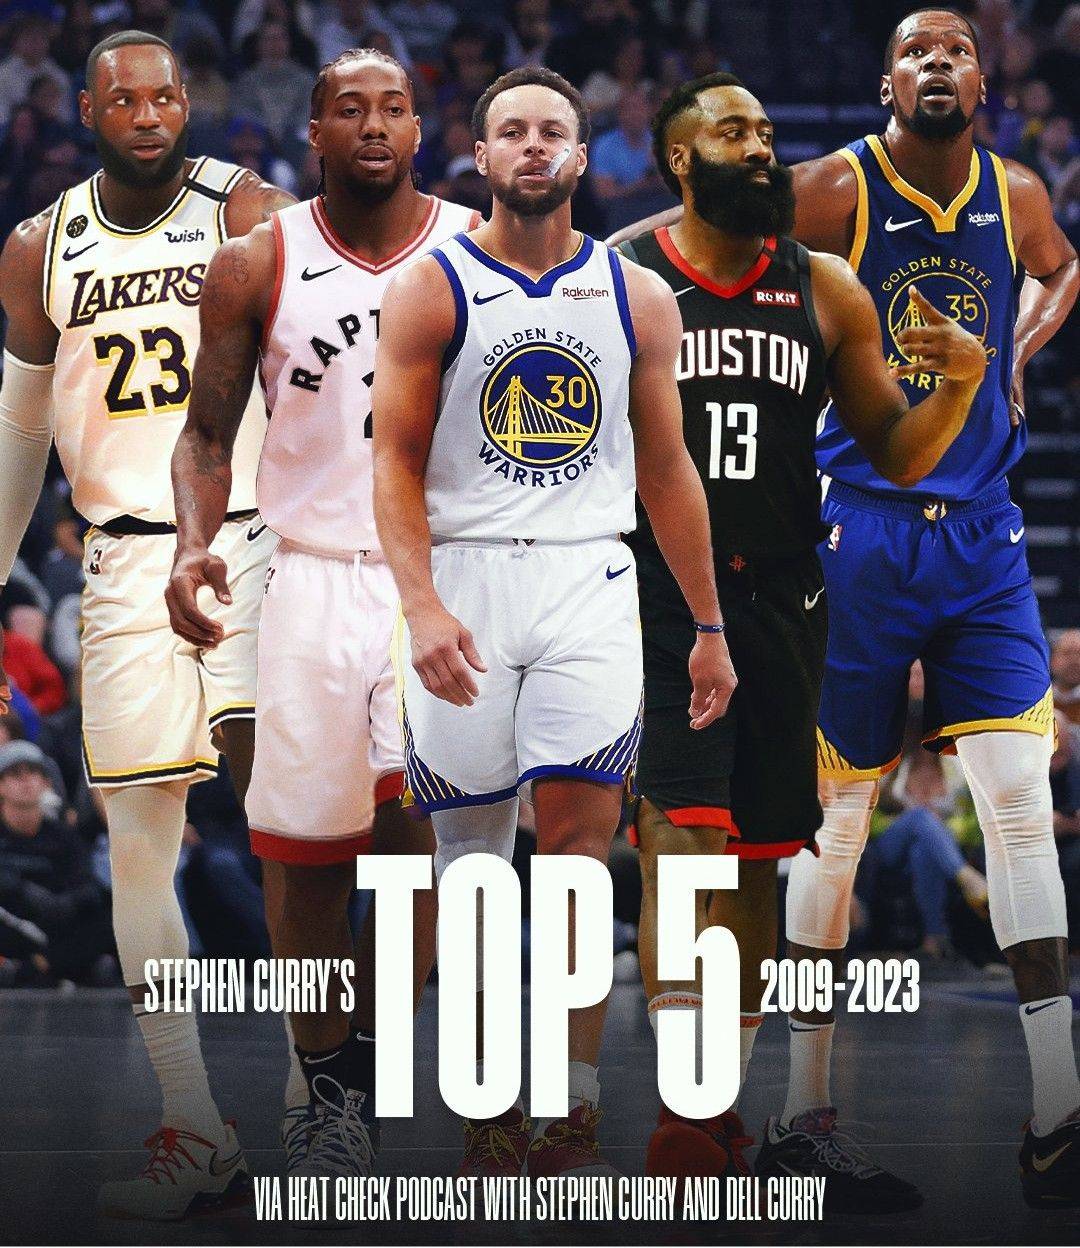 Curry's Top 5 Players of His Era: James, Durant, Leonard, Himself, Harden